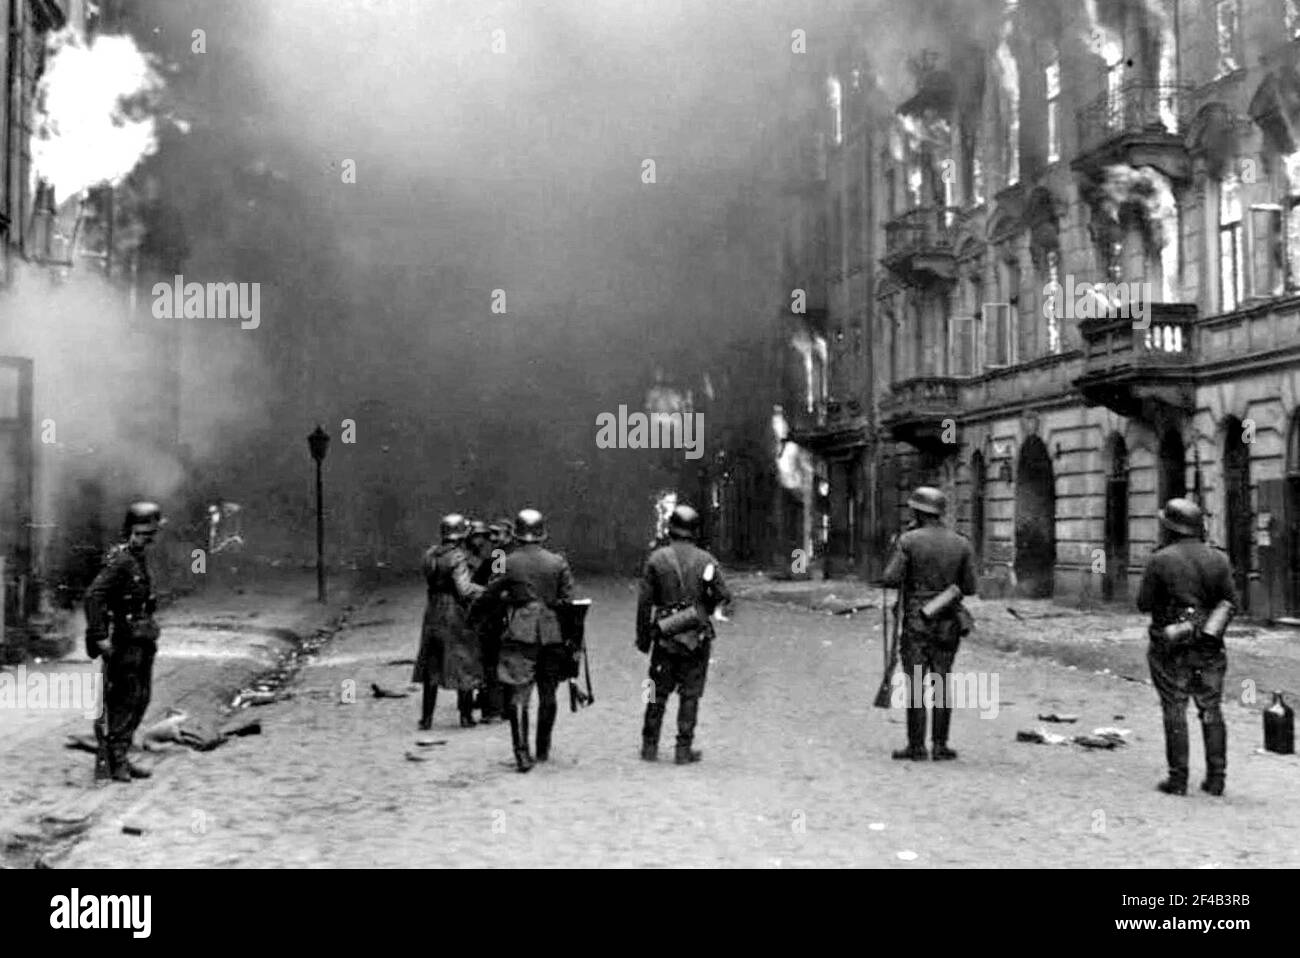 Stroop Report - Warsaw Ghetto Uprising - Nazi soldiers burning buidings ...